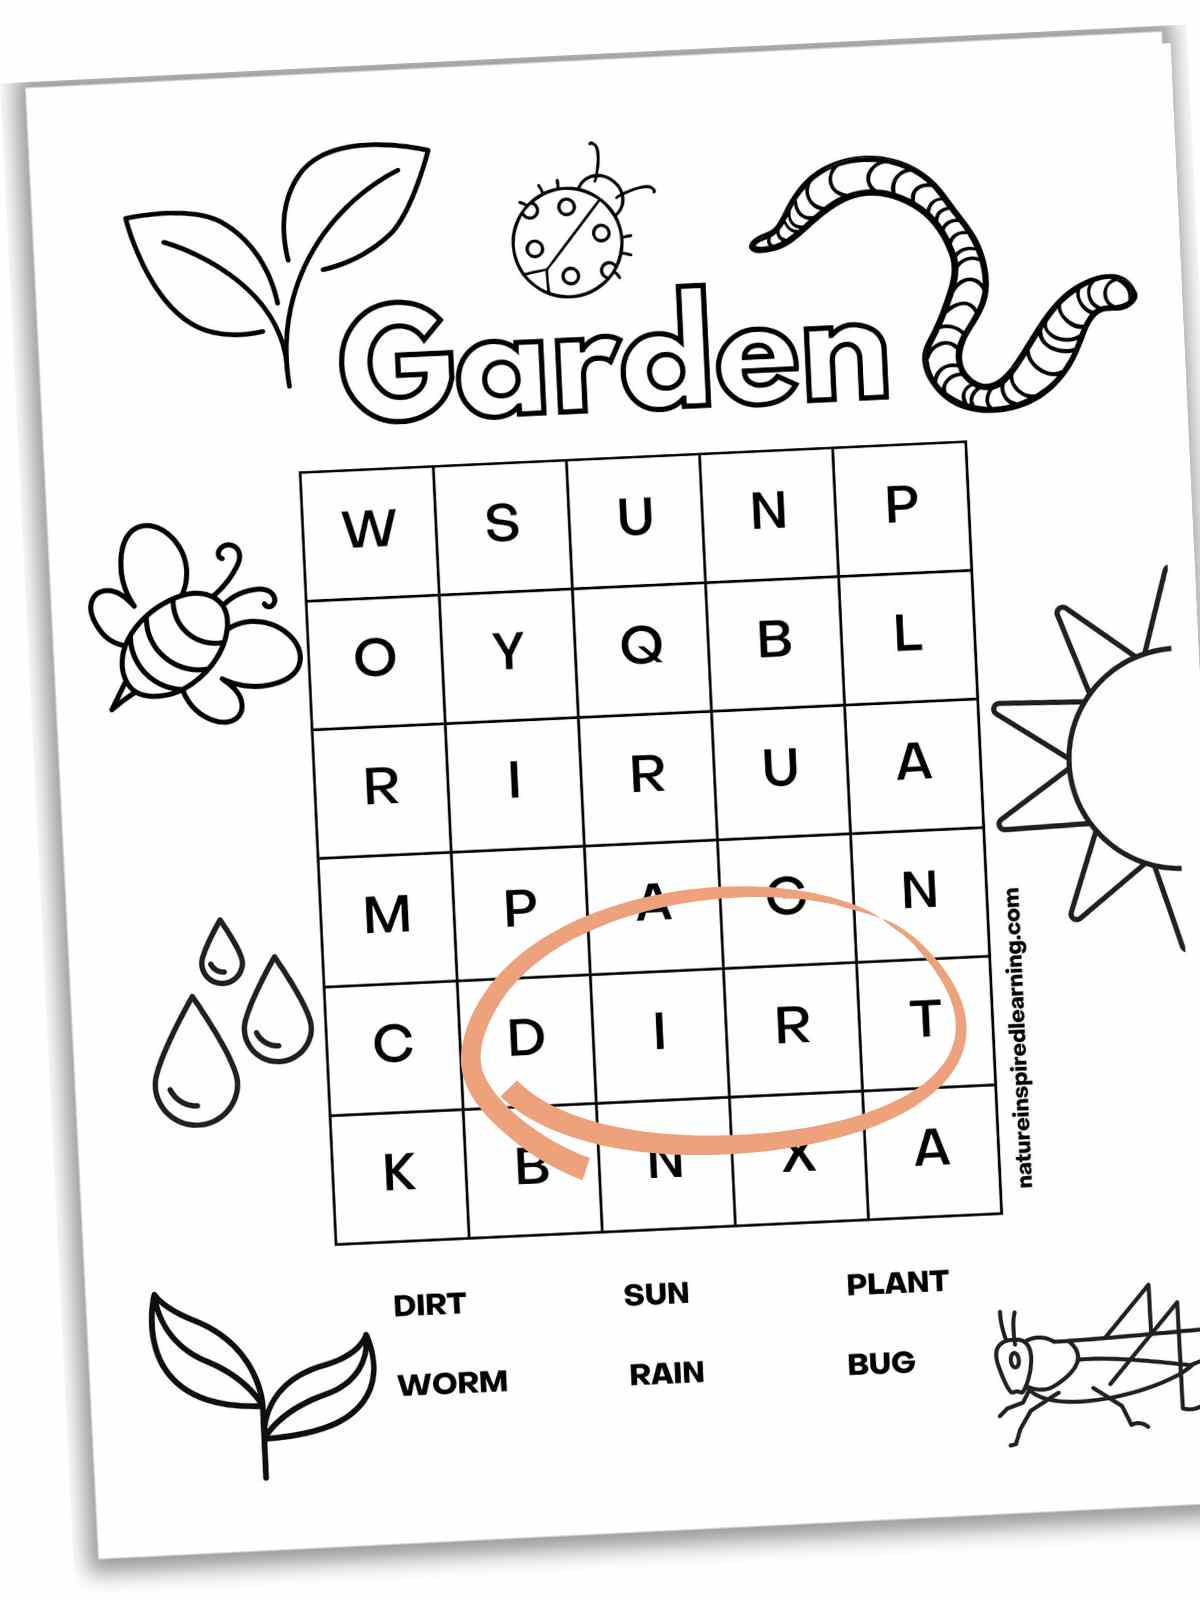 simple word search with garden words and images around the border. Dirt circled in peach.